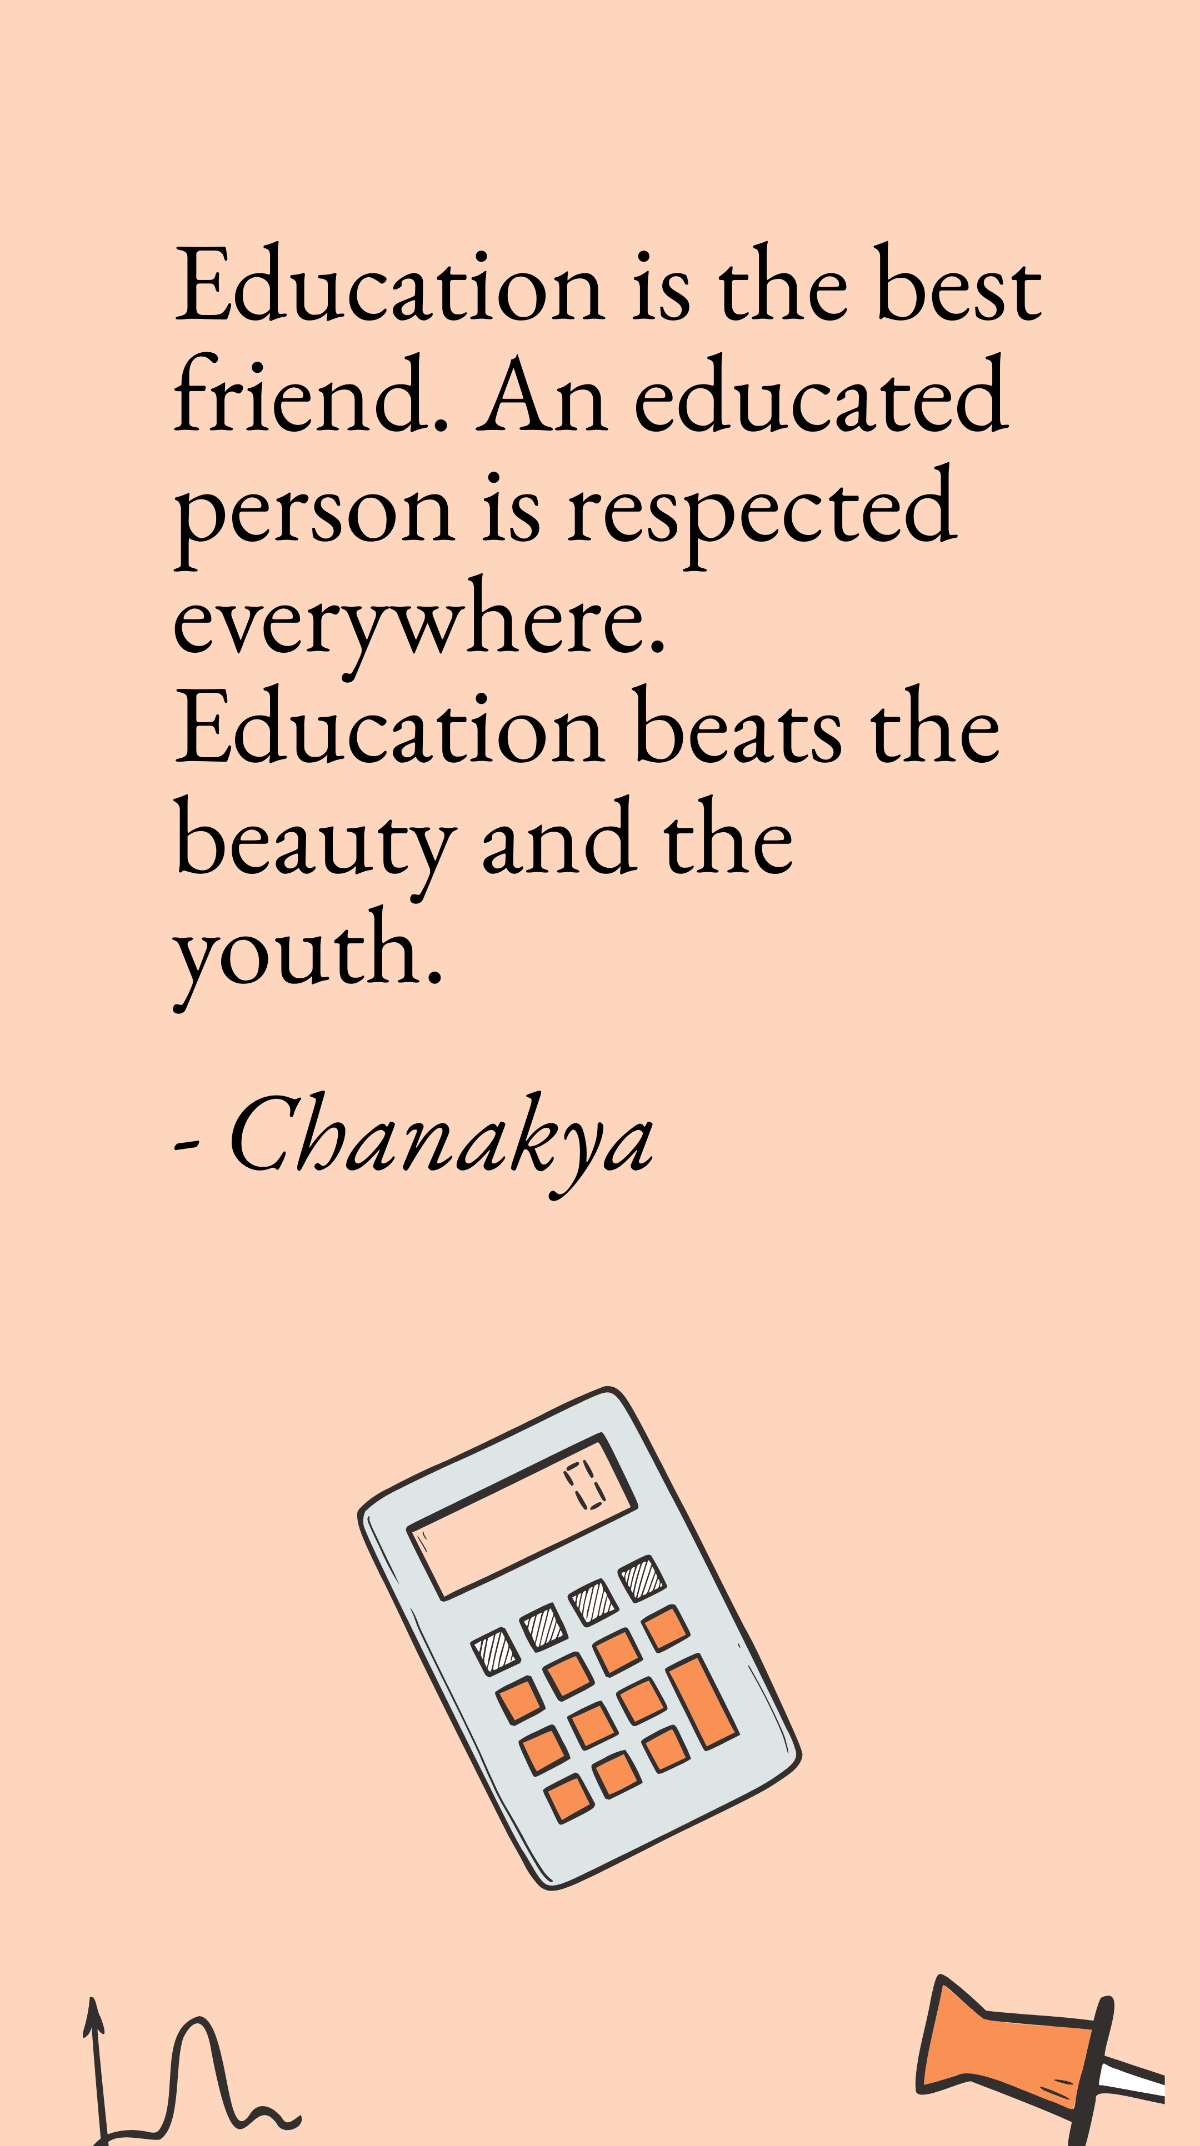 Chanakya - Education is the best friend. An educated person is respected everywhere. Education beats the beauty and the youth. Template